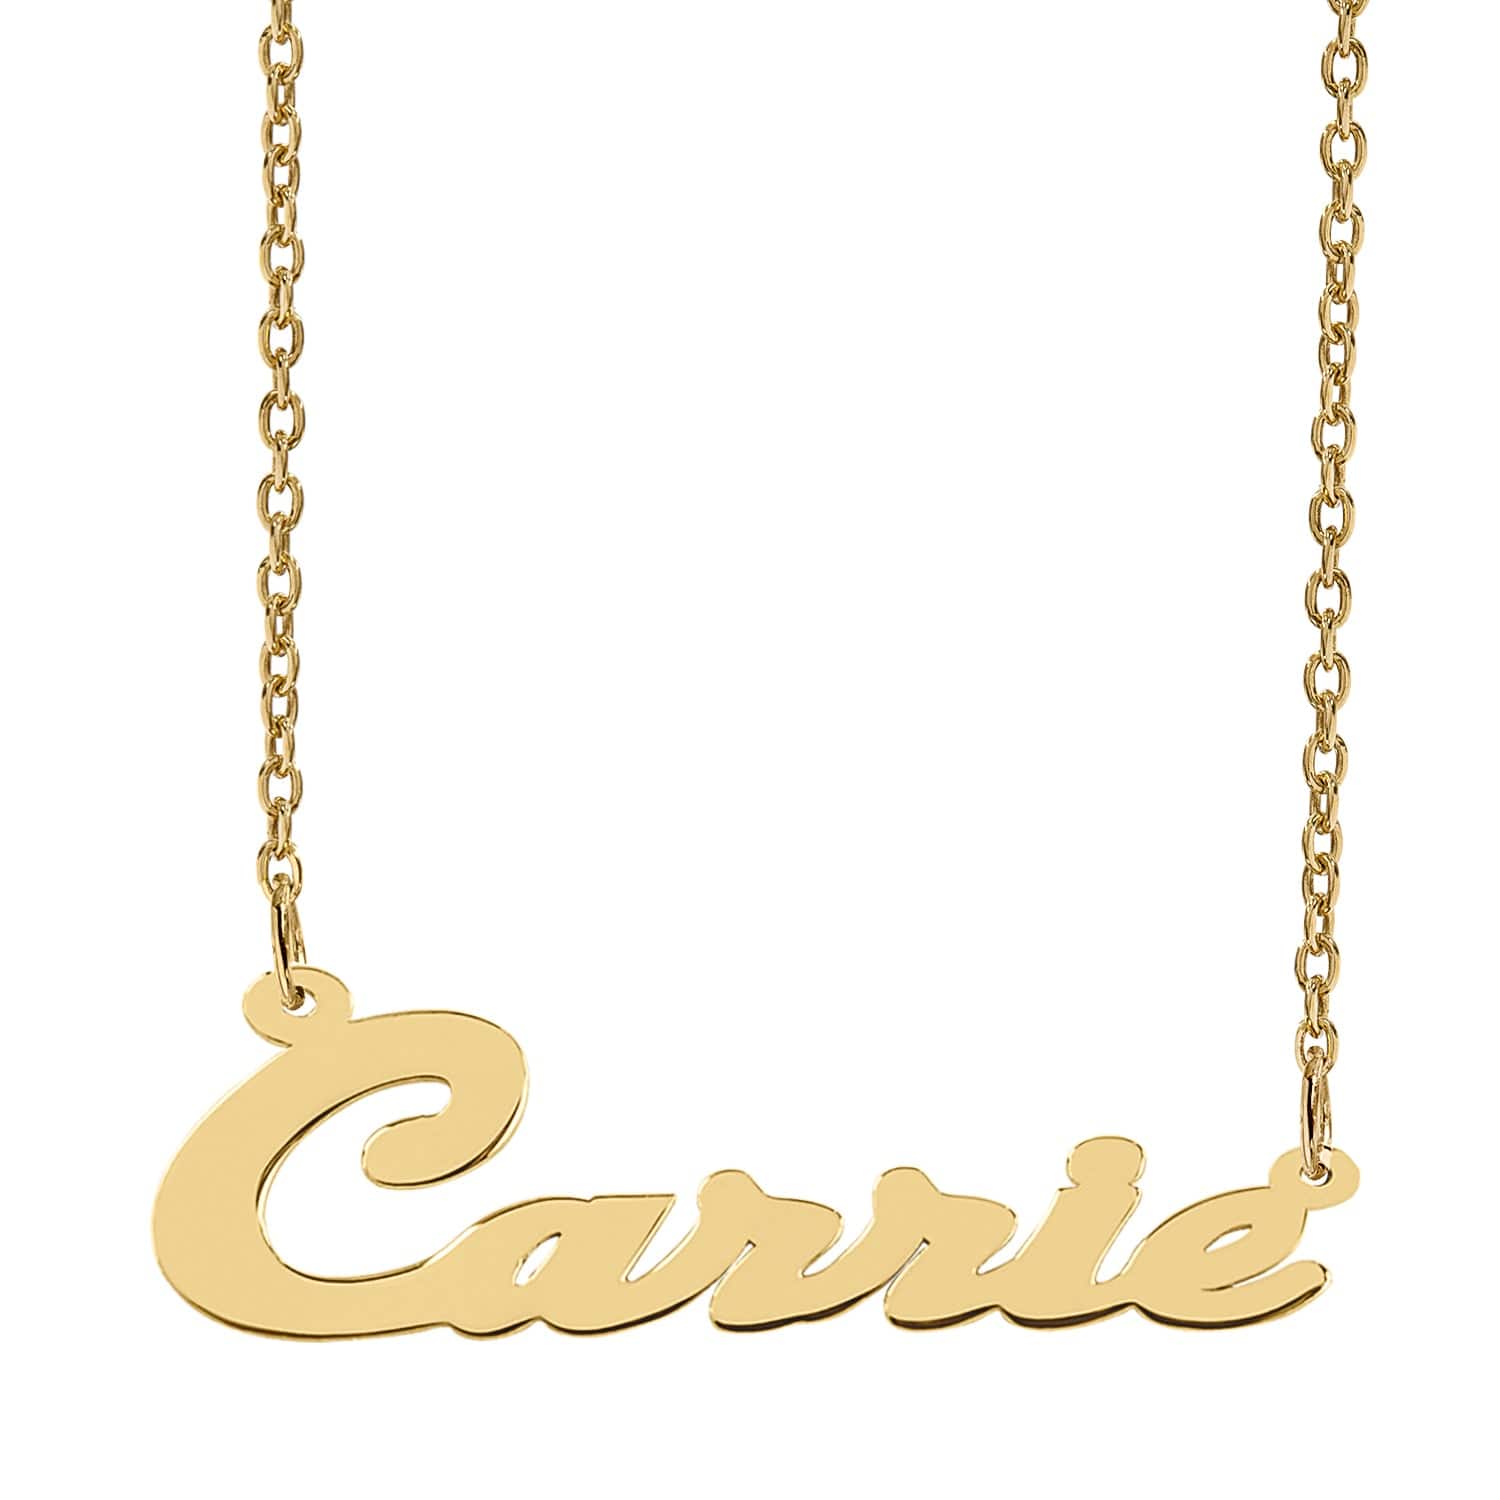 Gold Plated / Link Chain Script Name Necklace "Carrie"